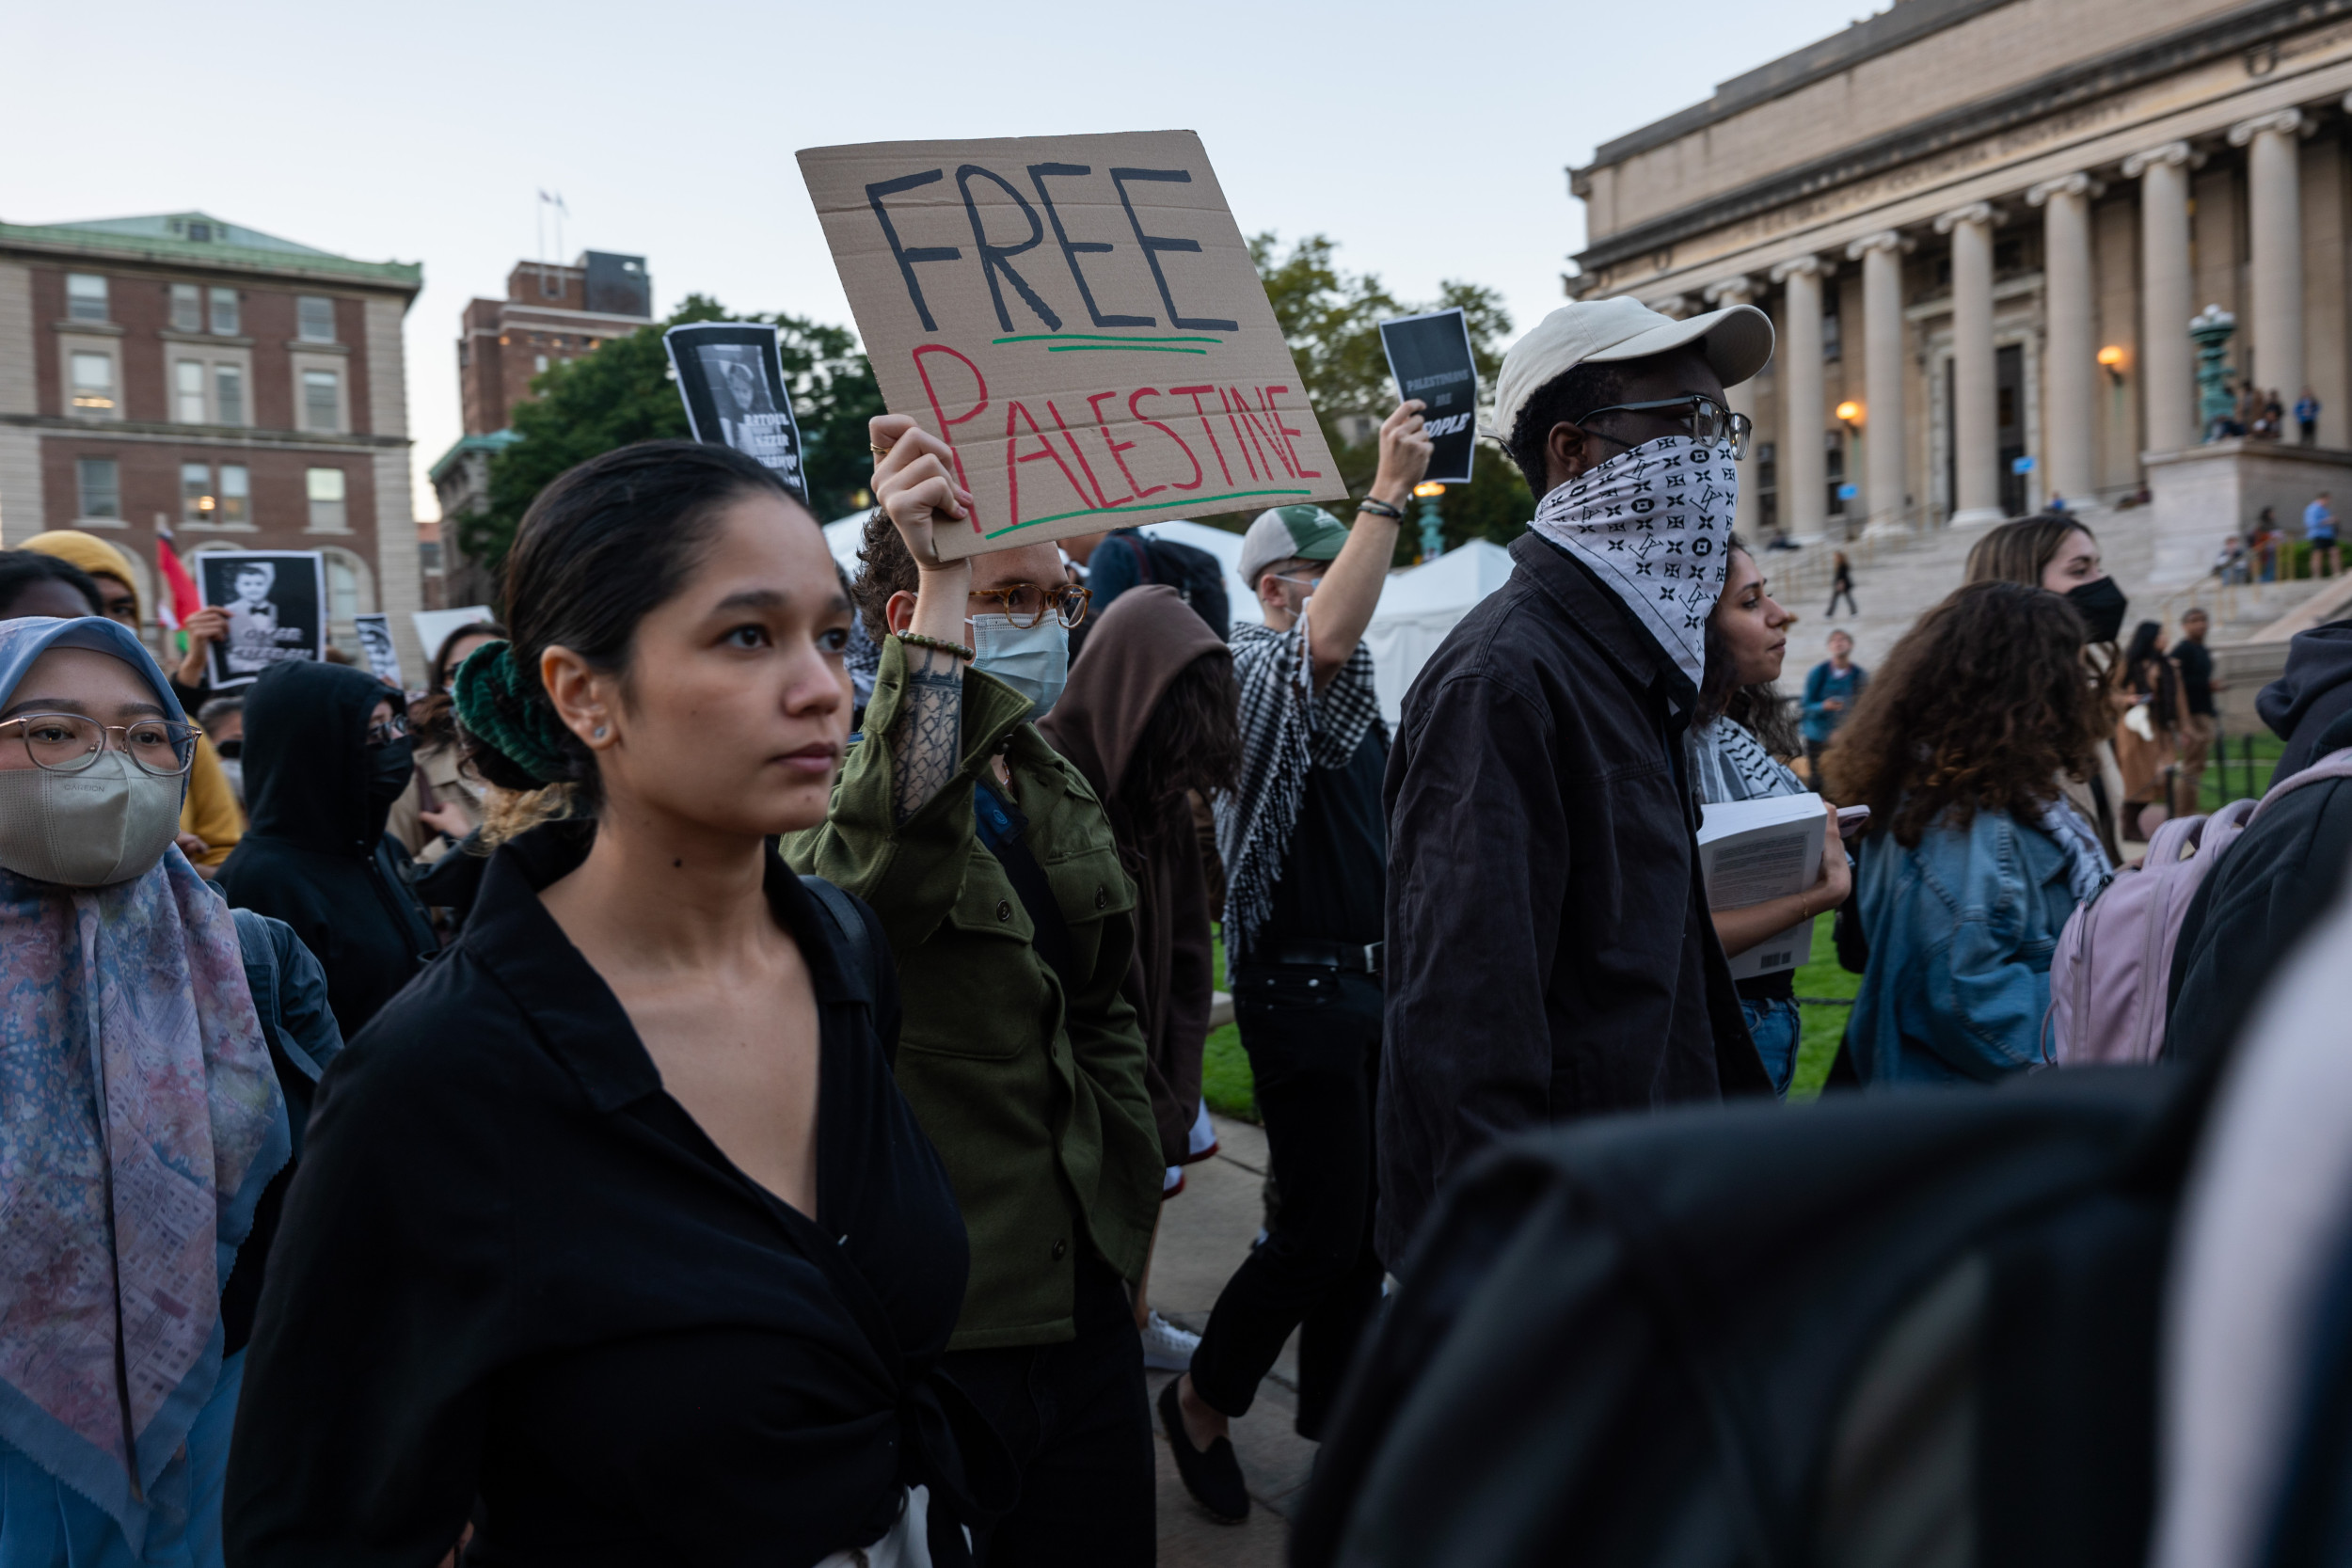 Columbia Suspends Pro-Palestine Groups for Unauthorized Event